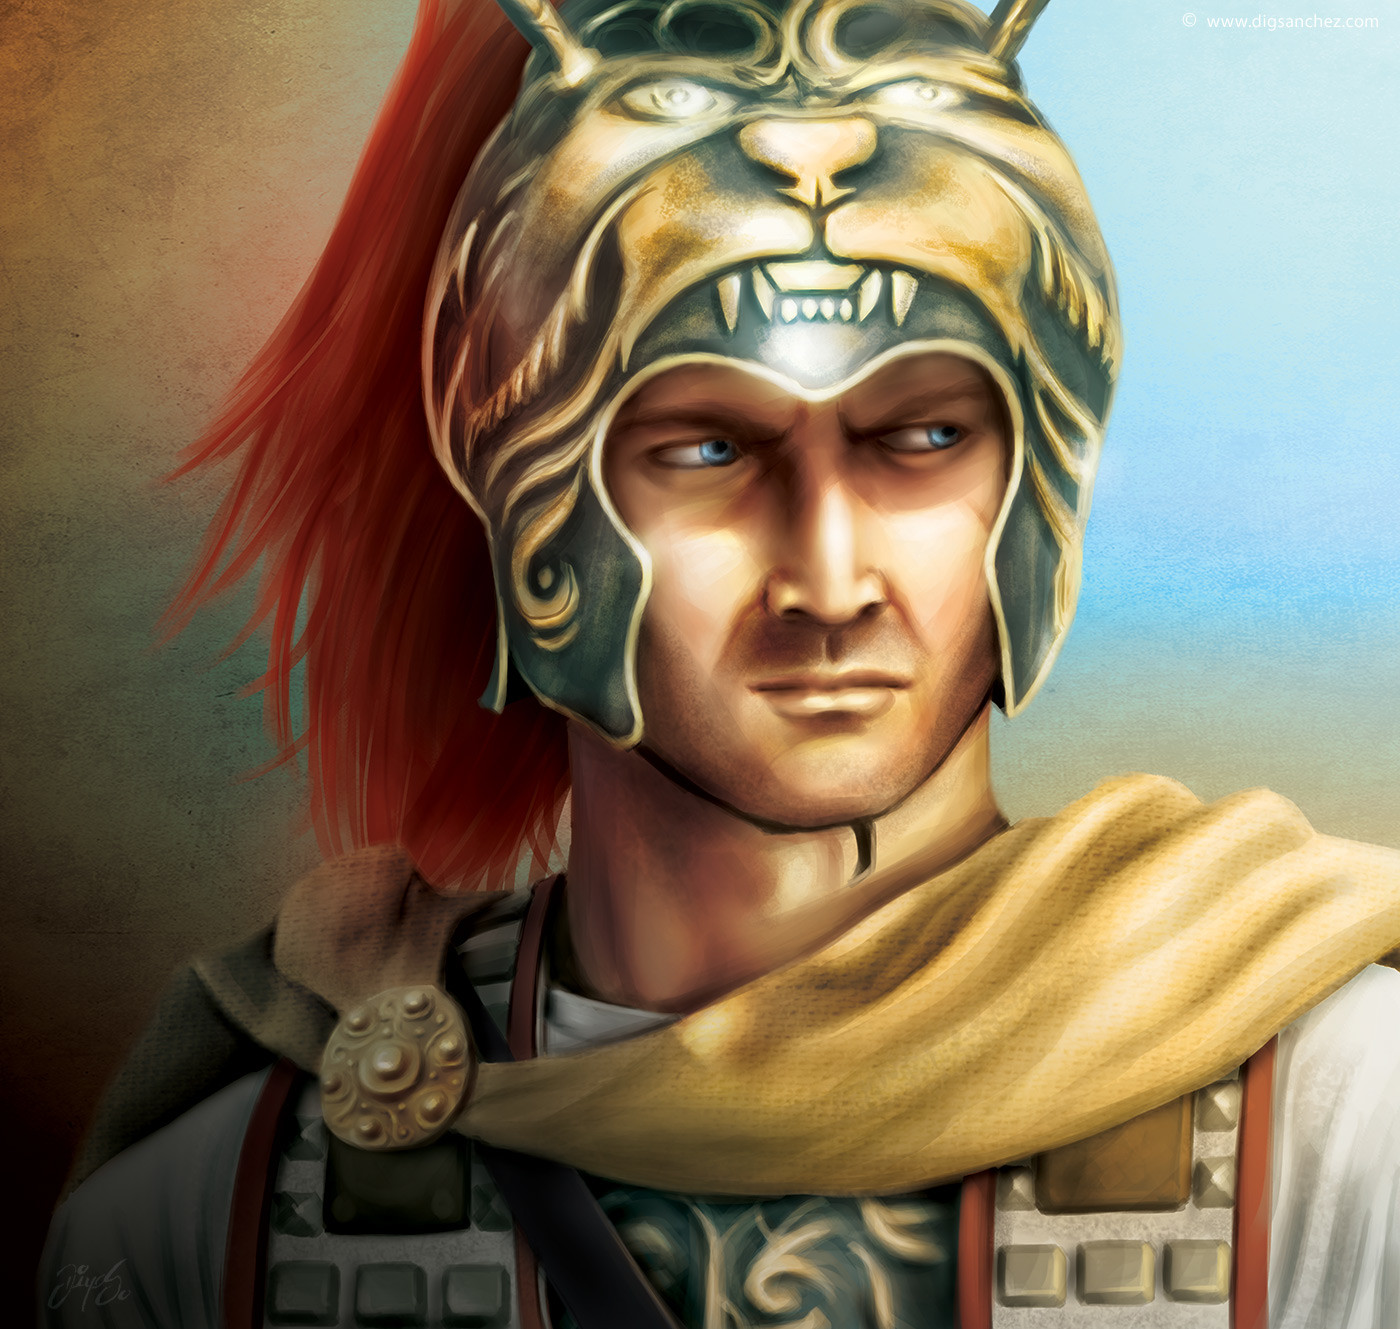 Card character - Alexander the Great